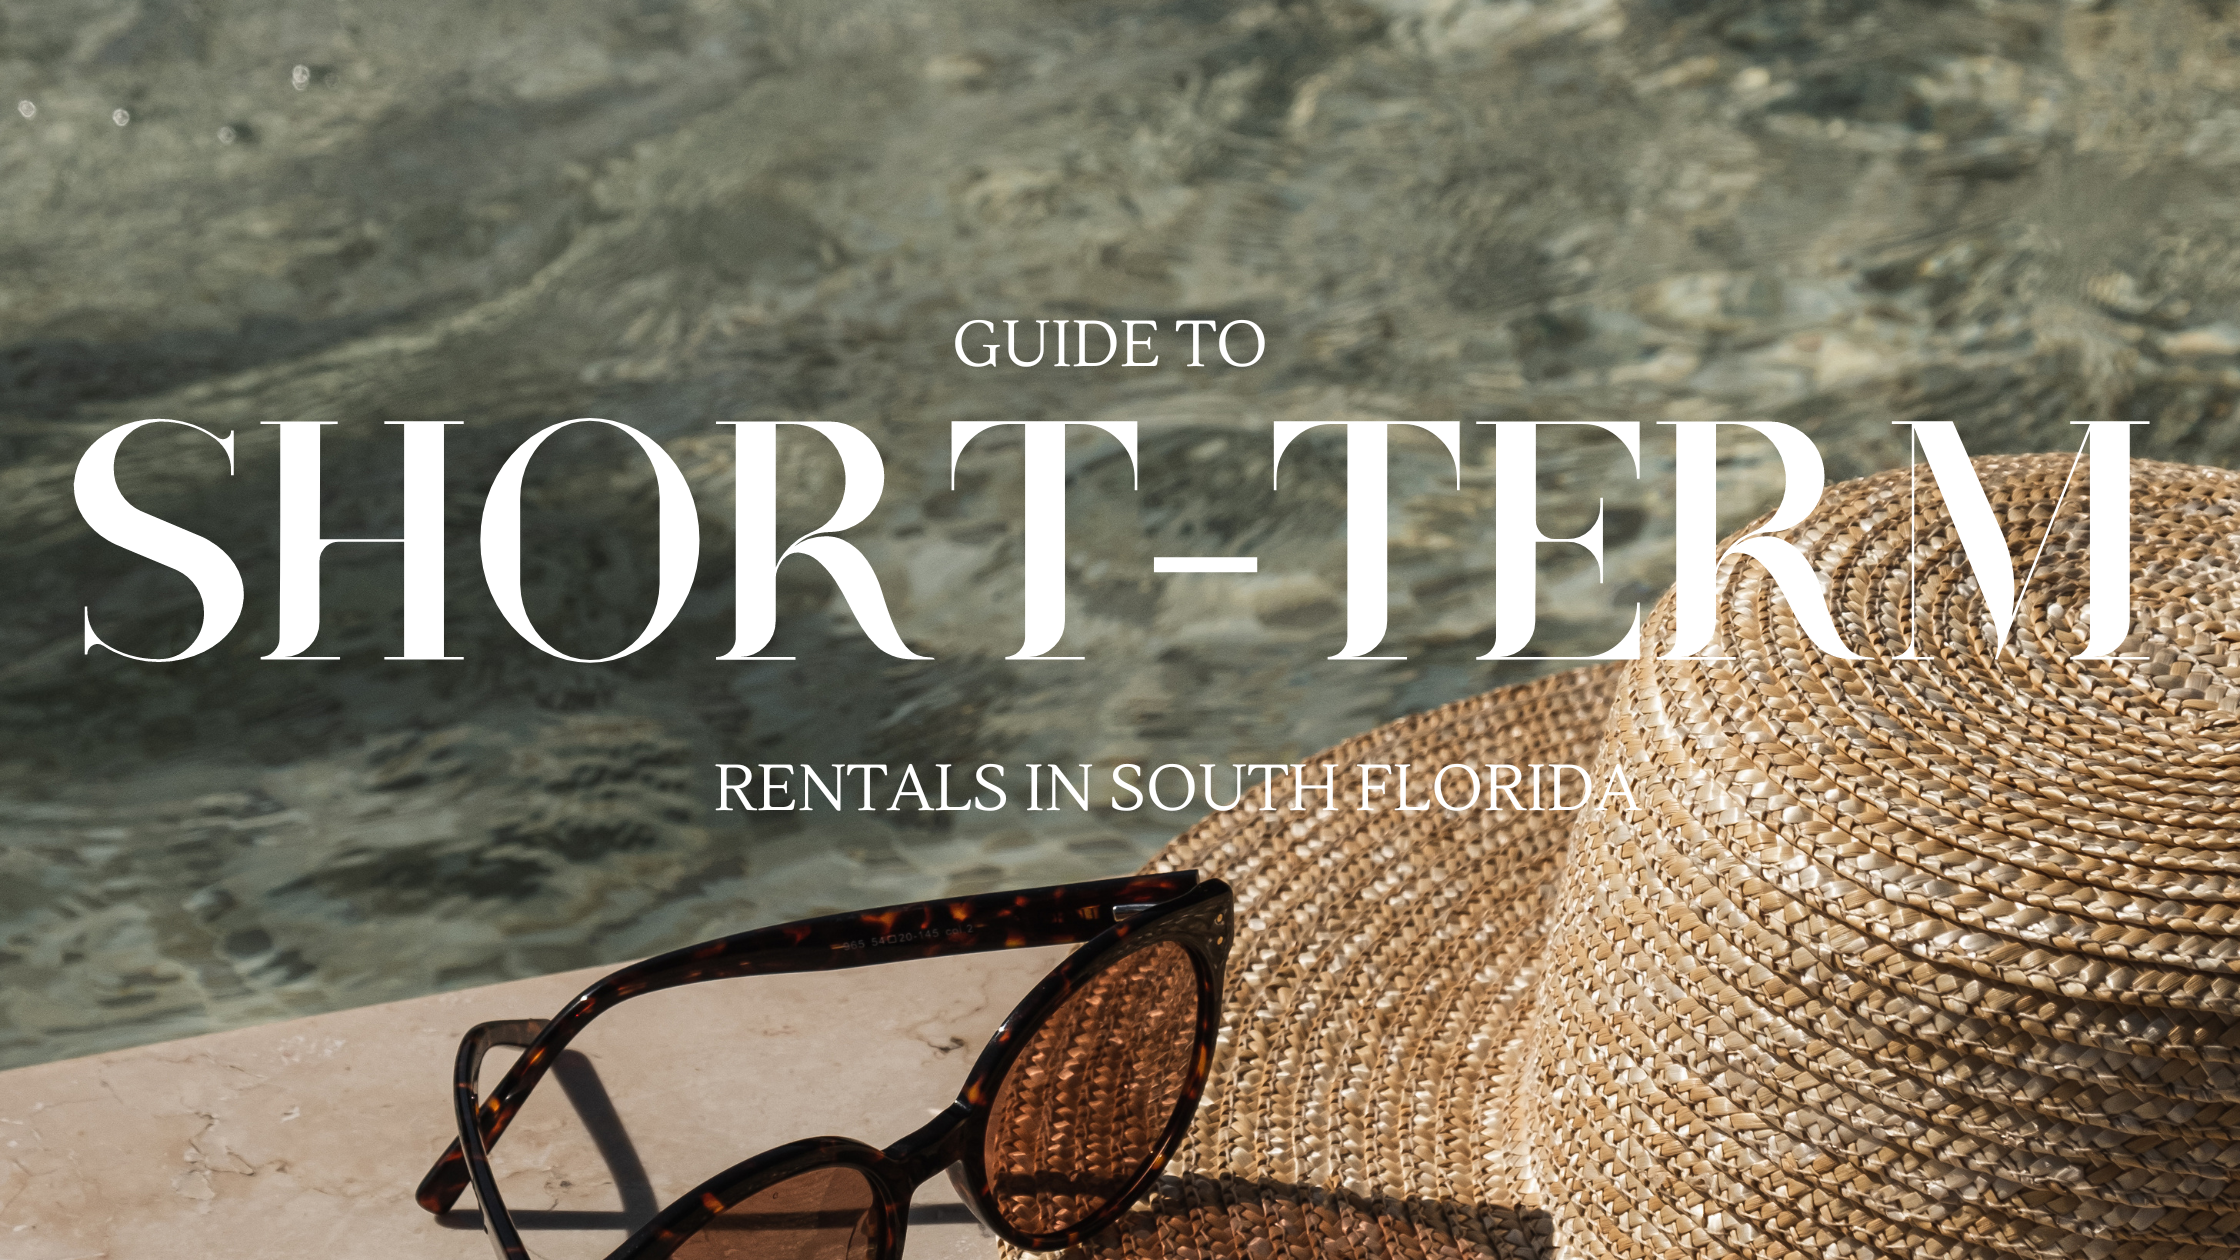 Guide to short-term rental condos in South Florida